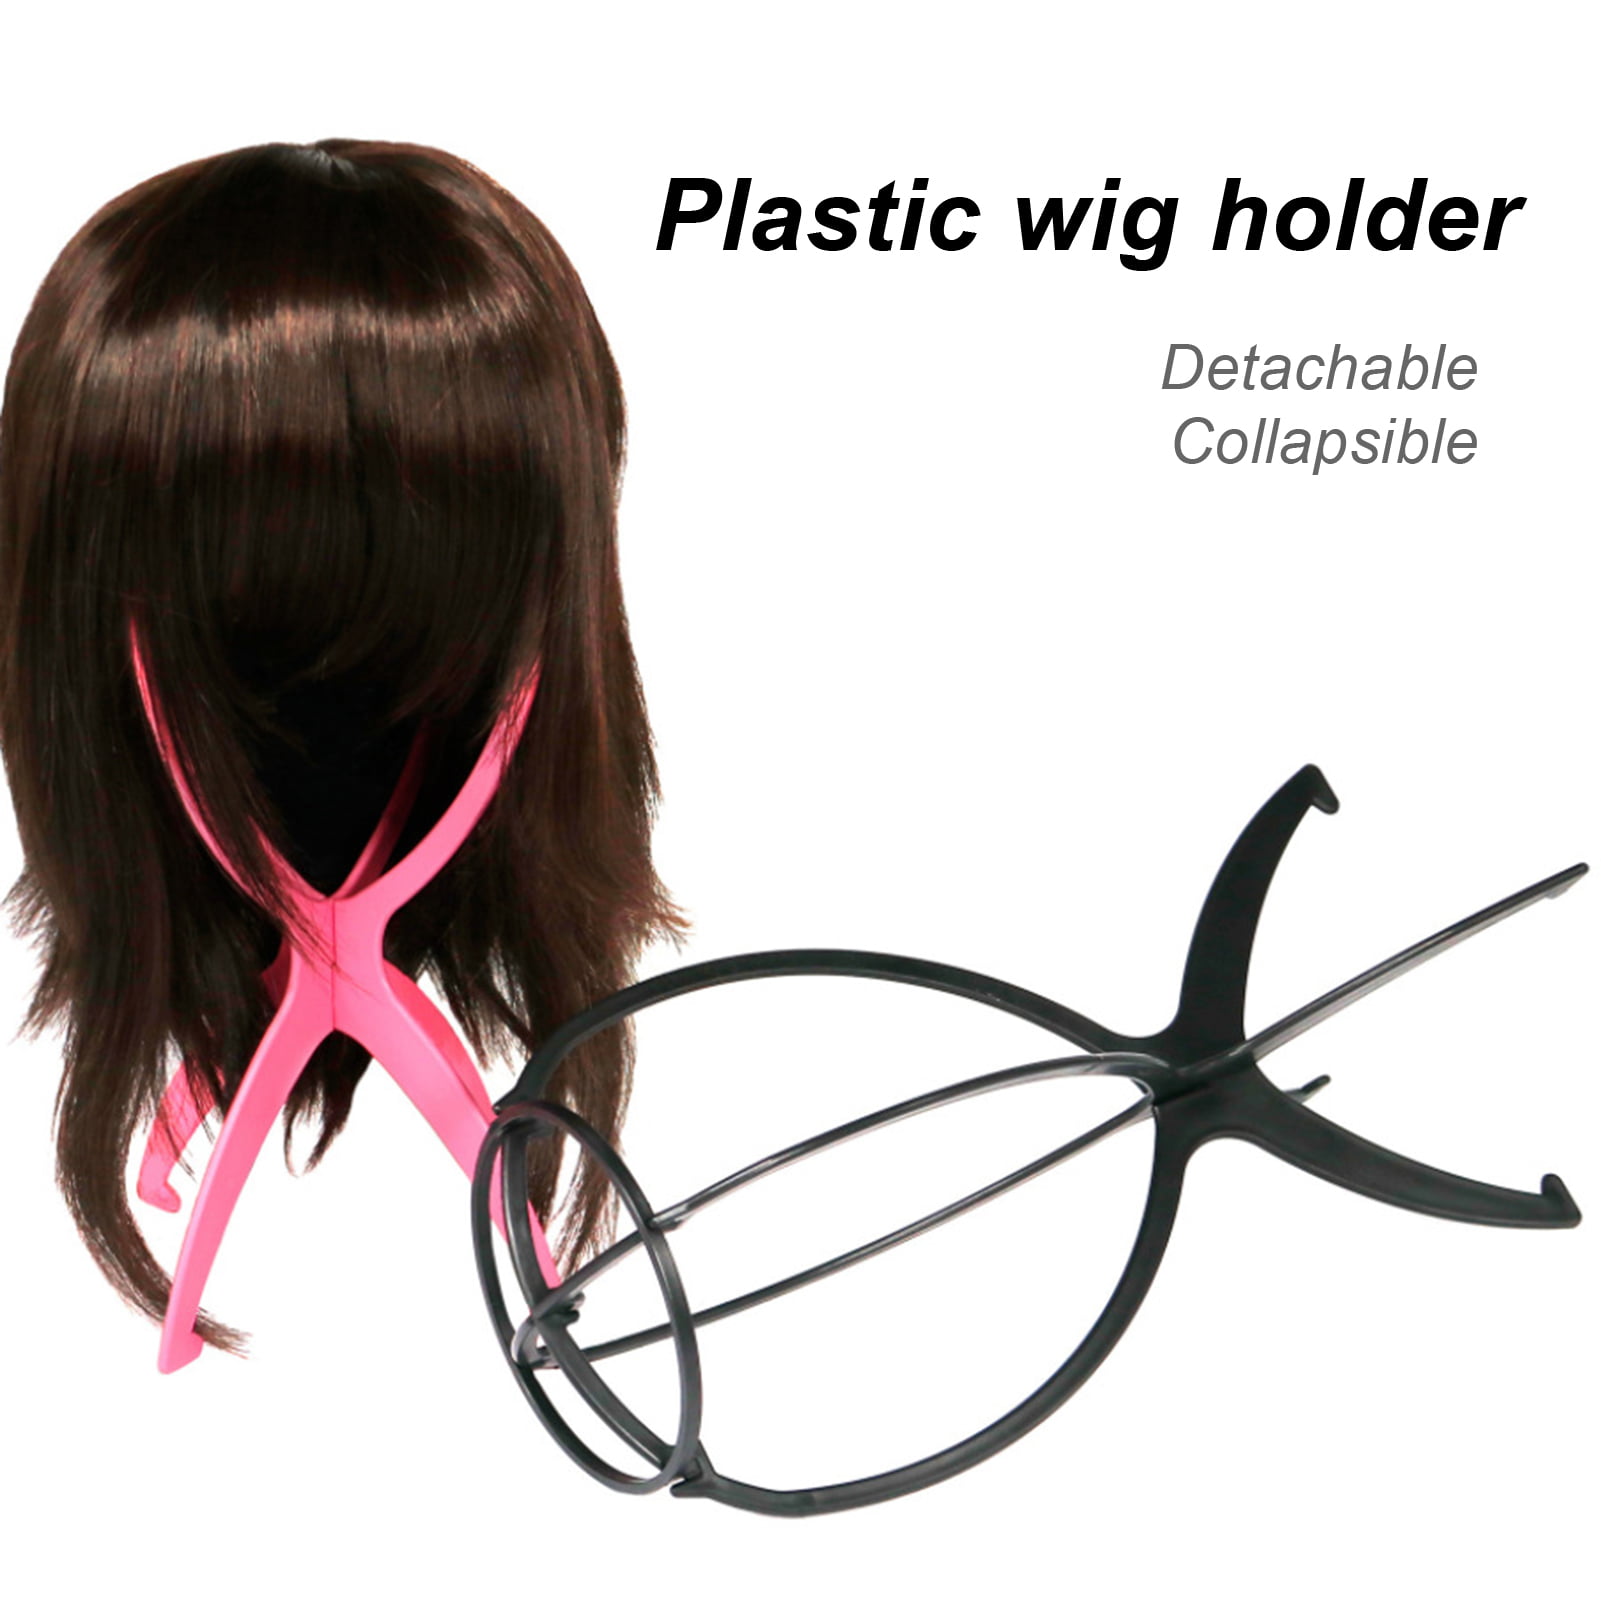 2Pcs Portable Wig Head Stand Holder Hair Styling Display Beauty